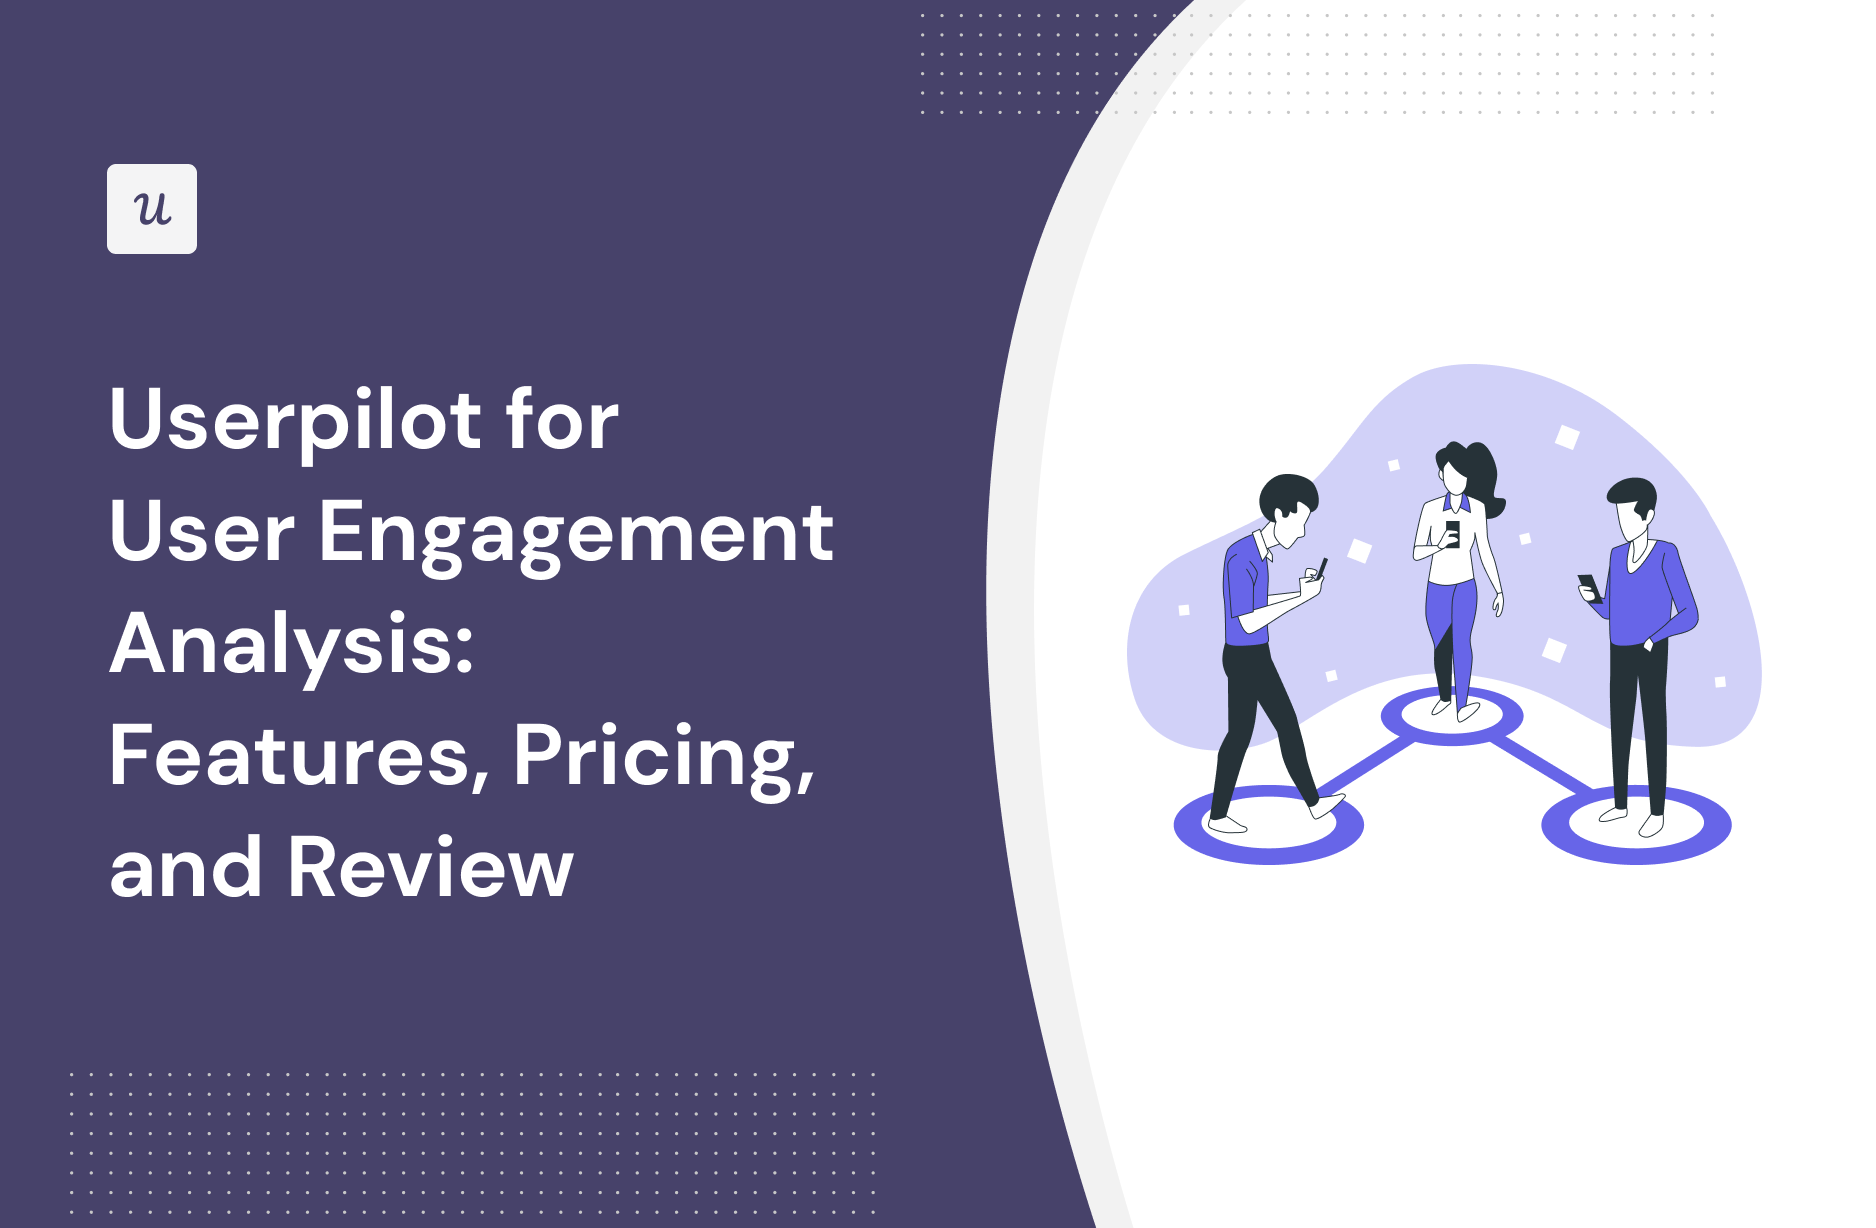 Userpilot for User Engagement Analysis: Features, Pricing, and Review